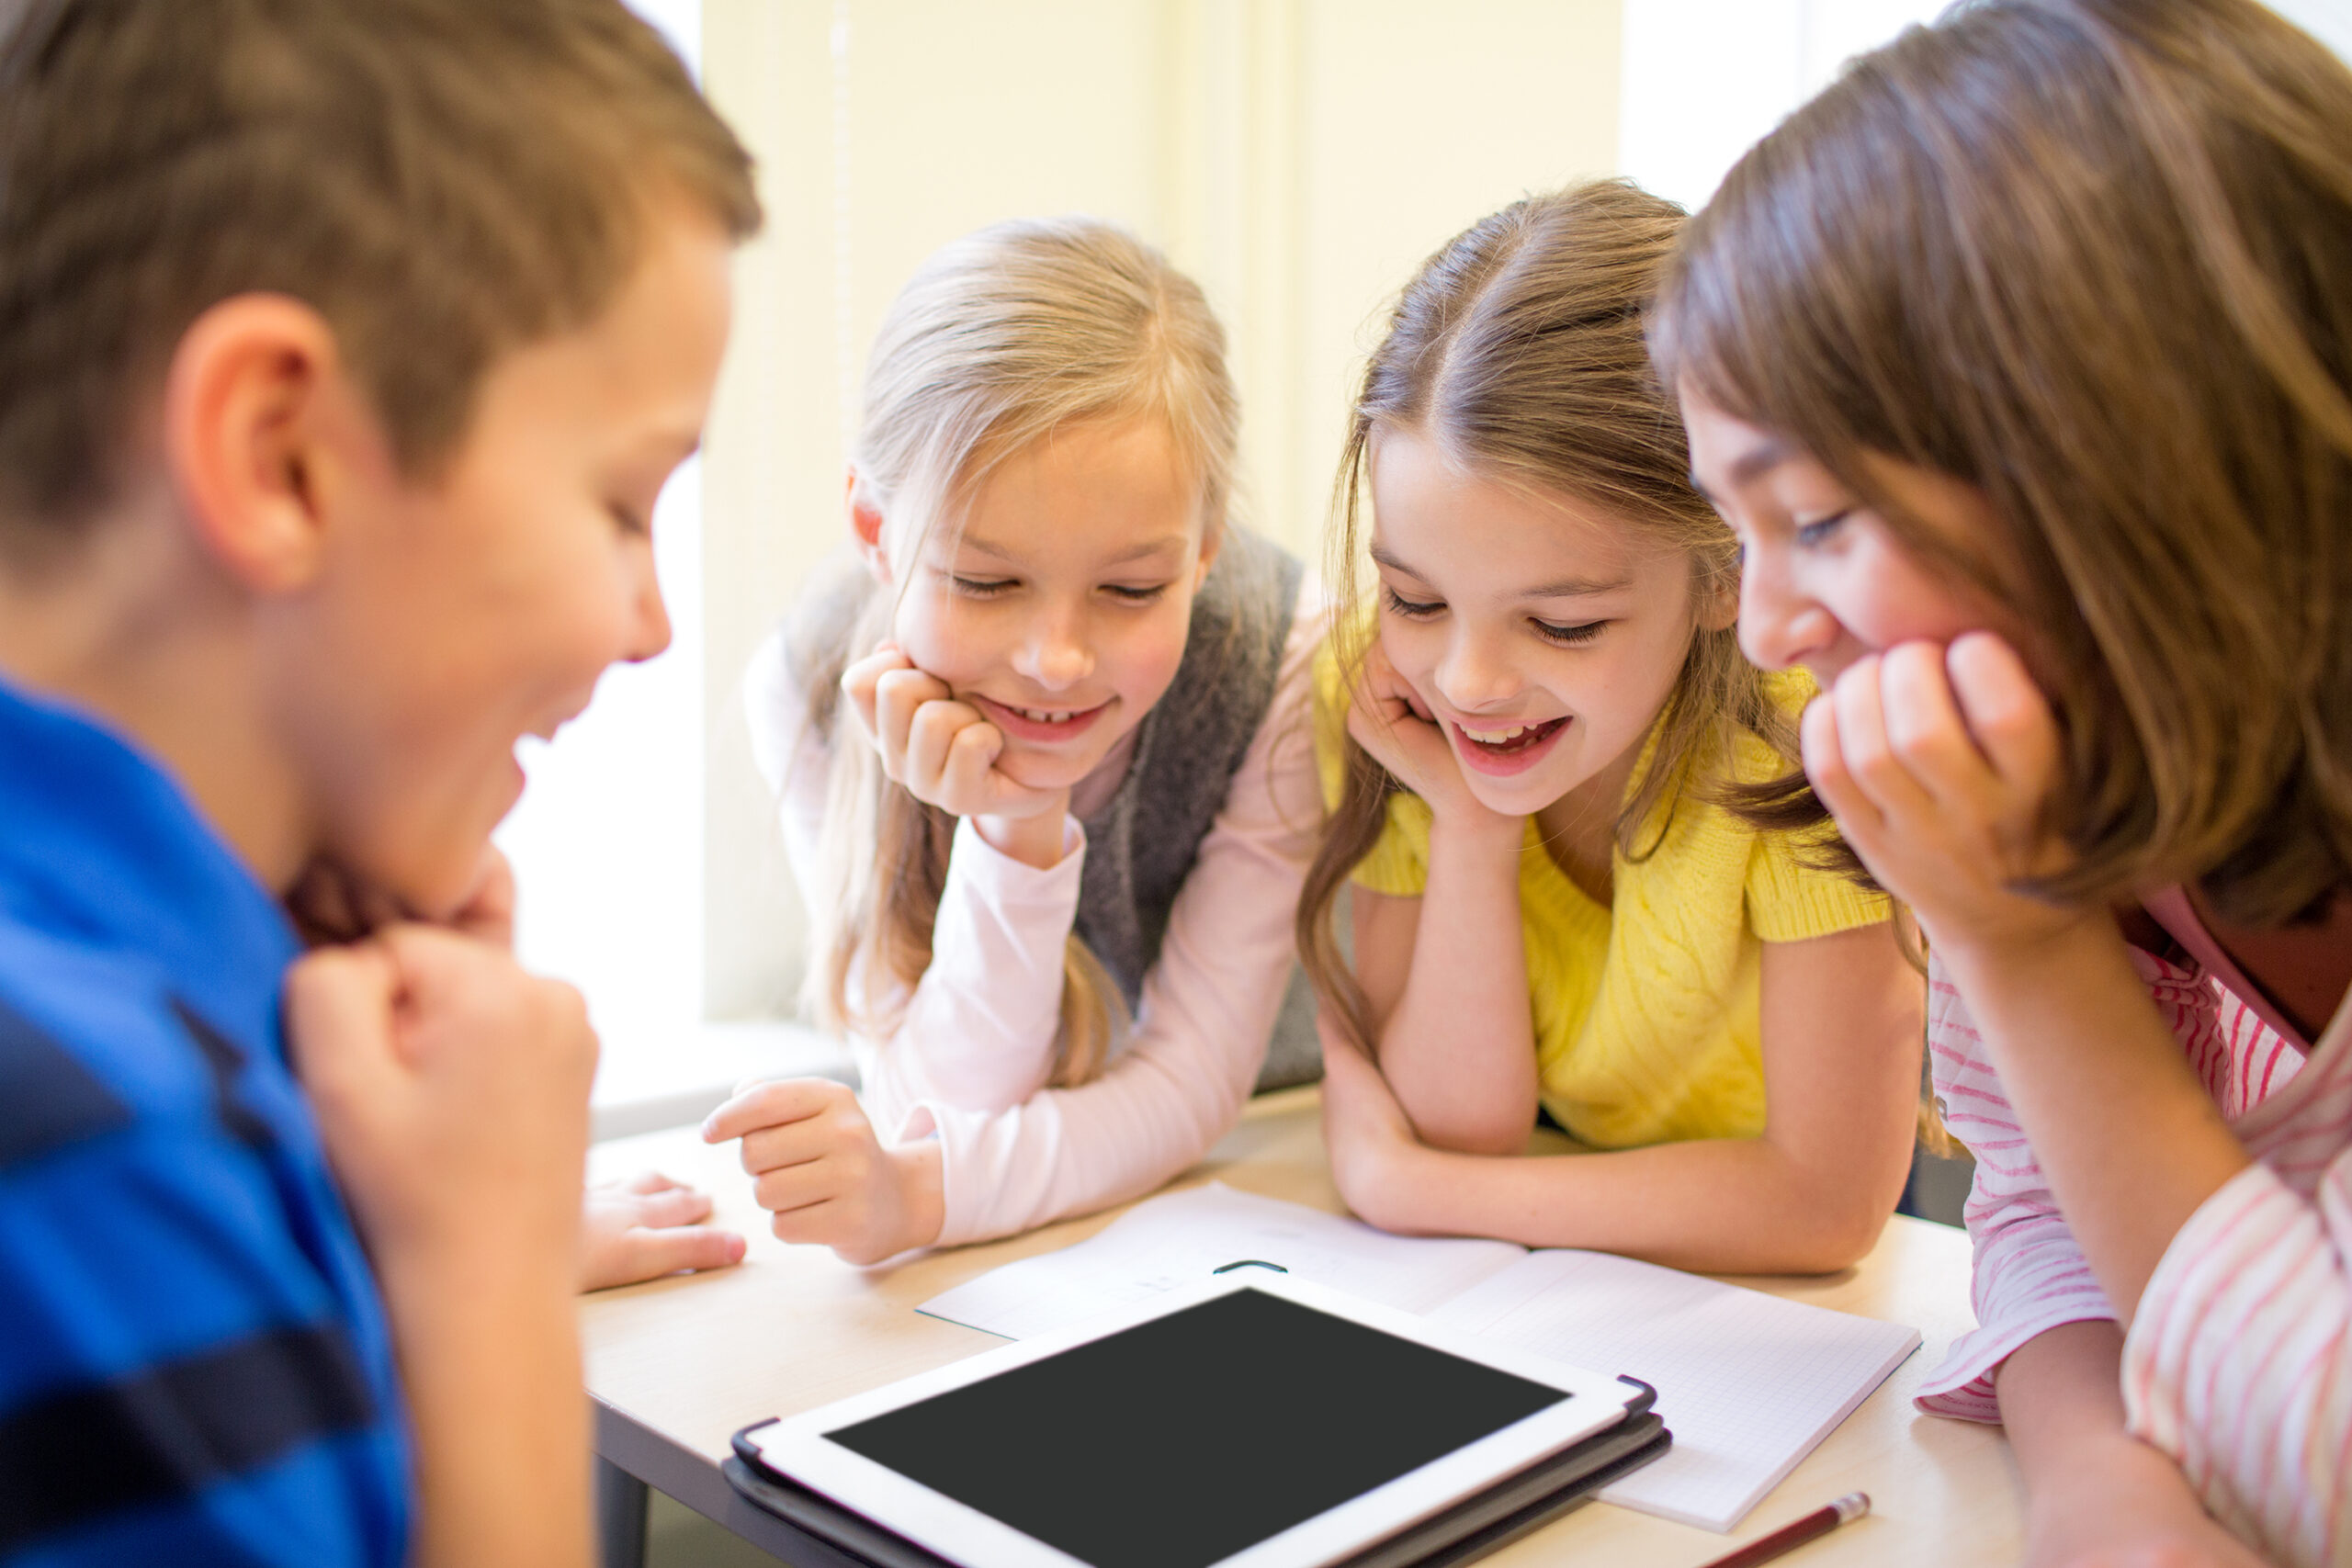 Group of 4 children leaning on a table looking down at a tablet